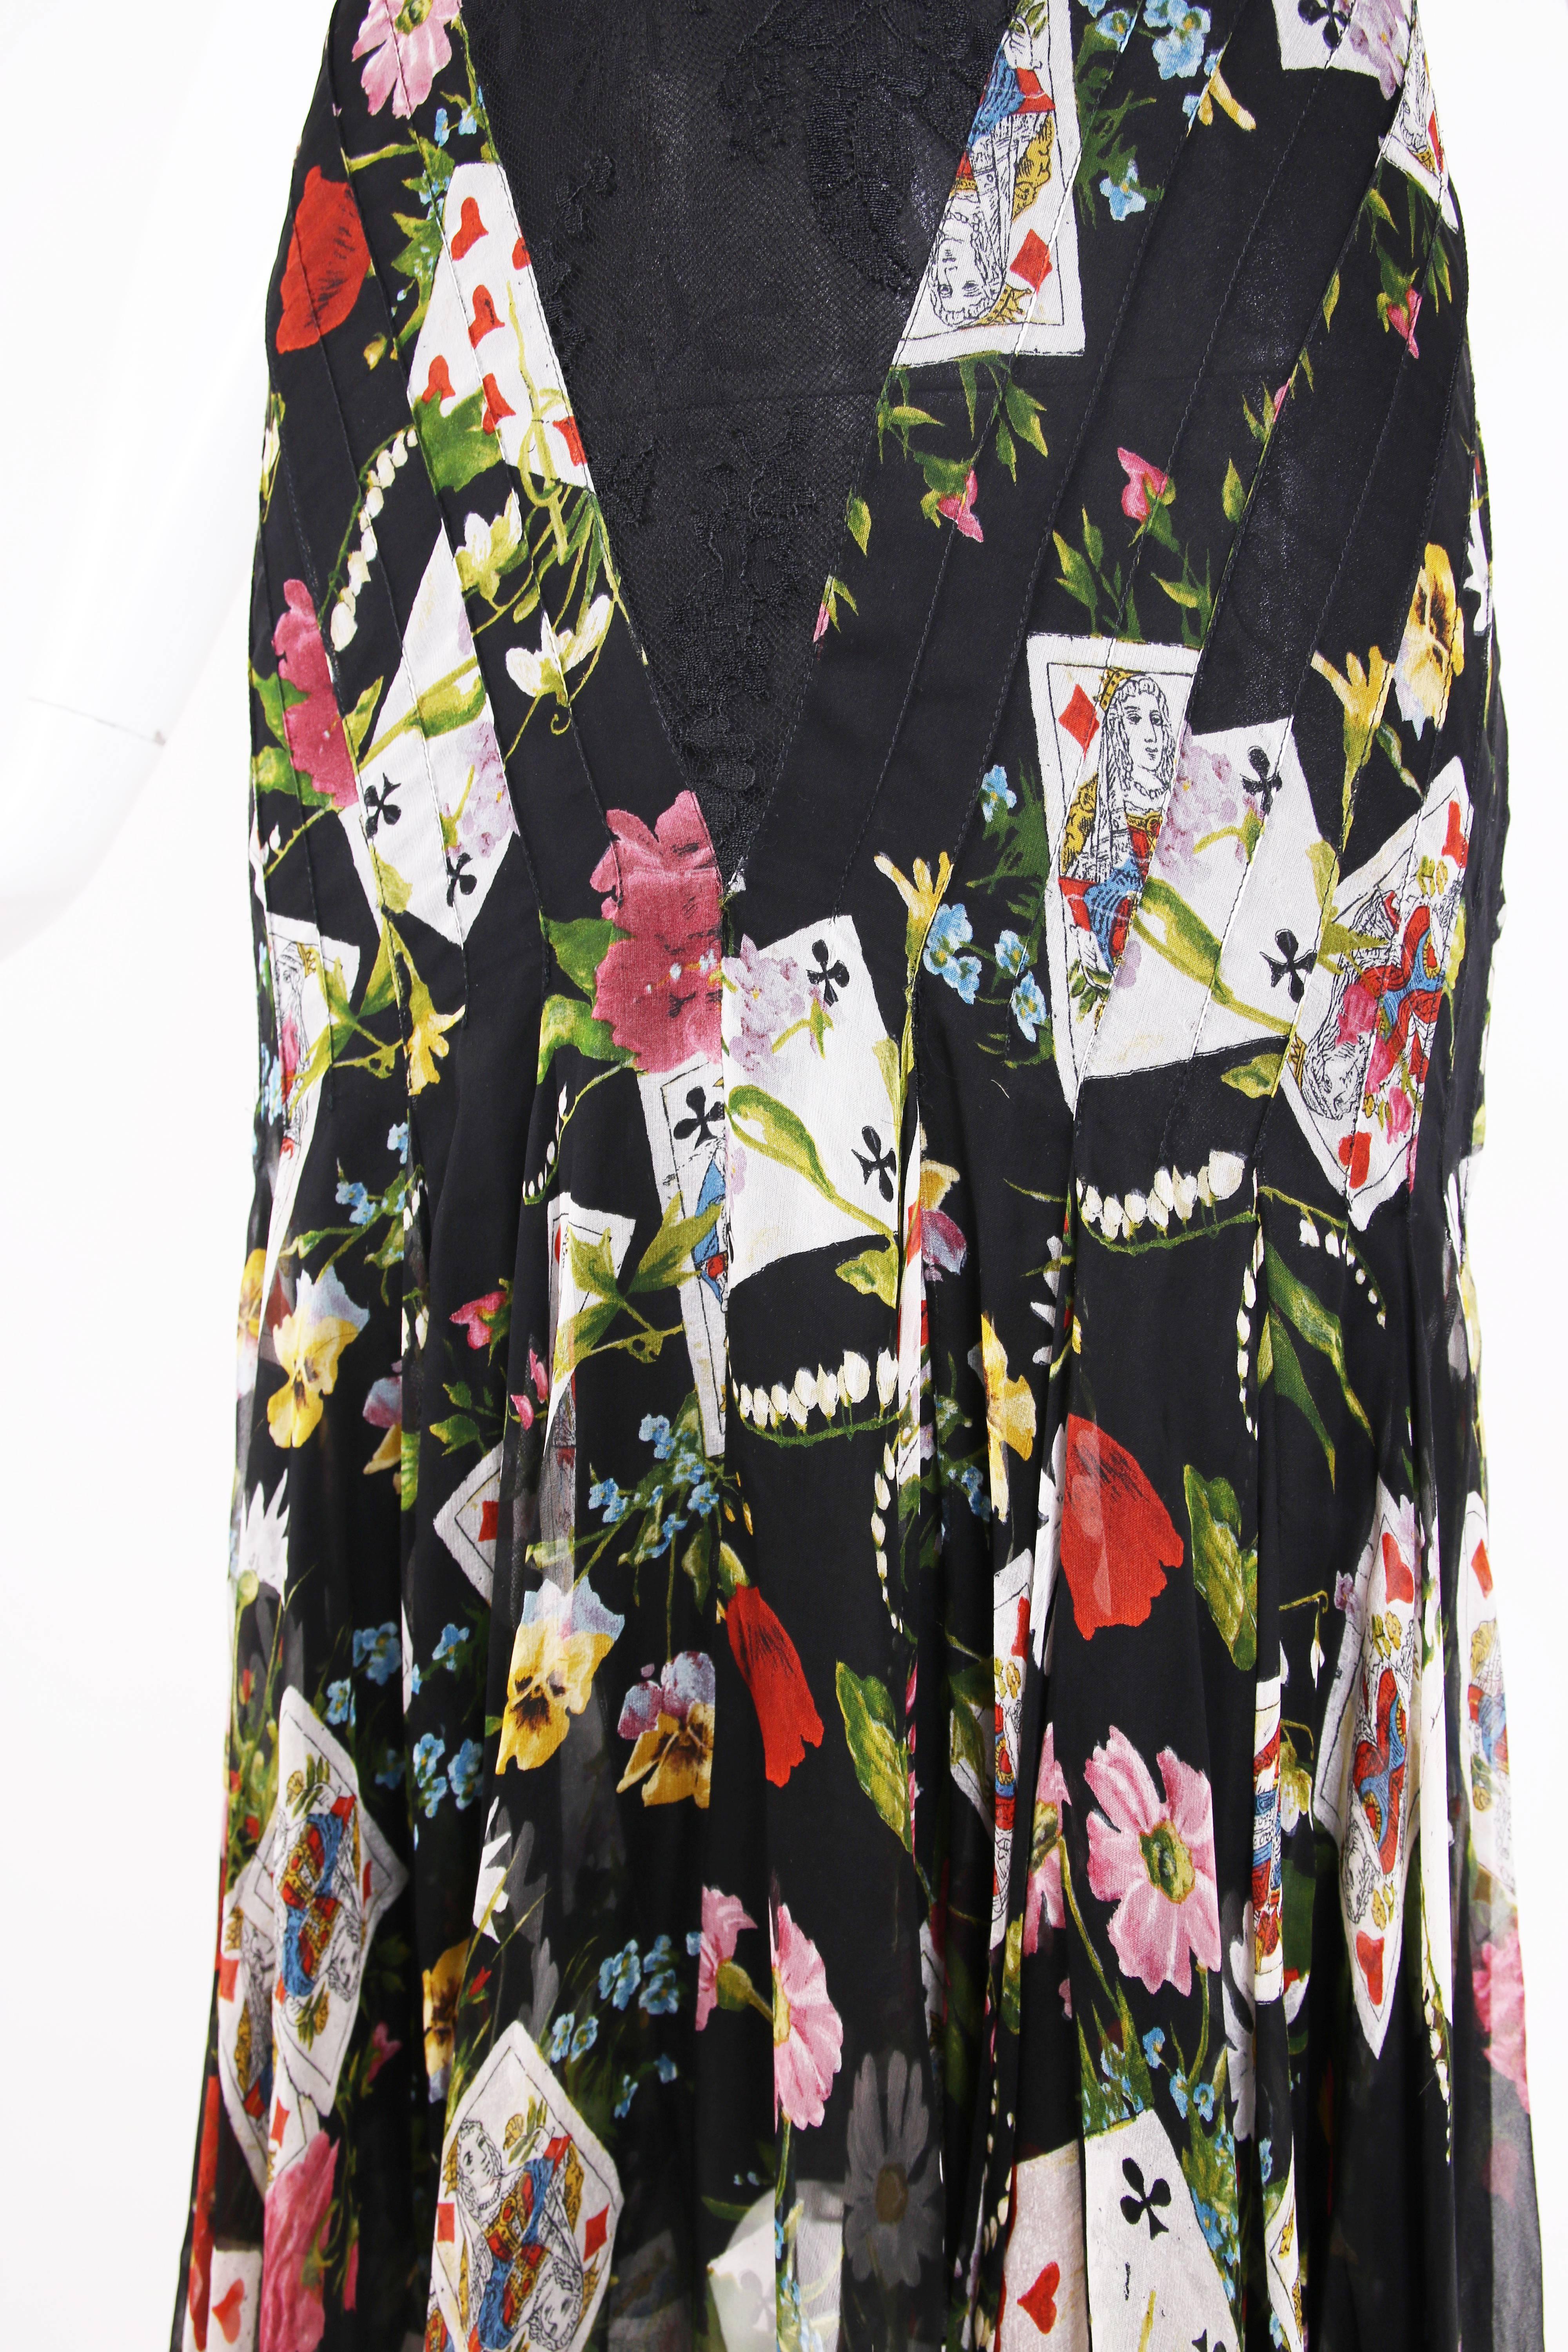 Black  Christian Dior by Galliano Chiffon & Lace Playing Card Print Cocktail Dress For Sale